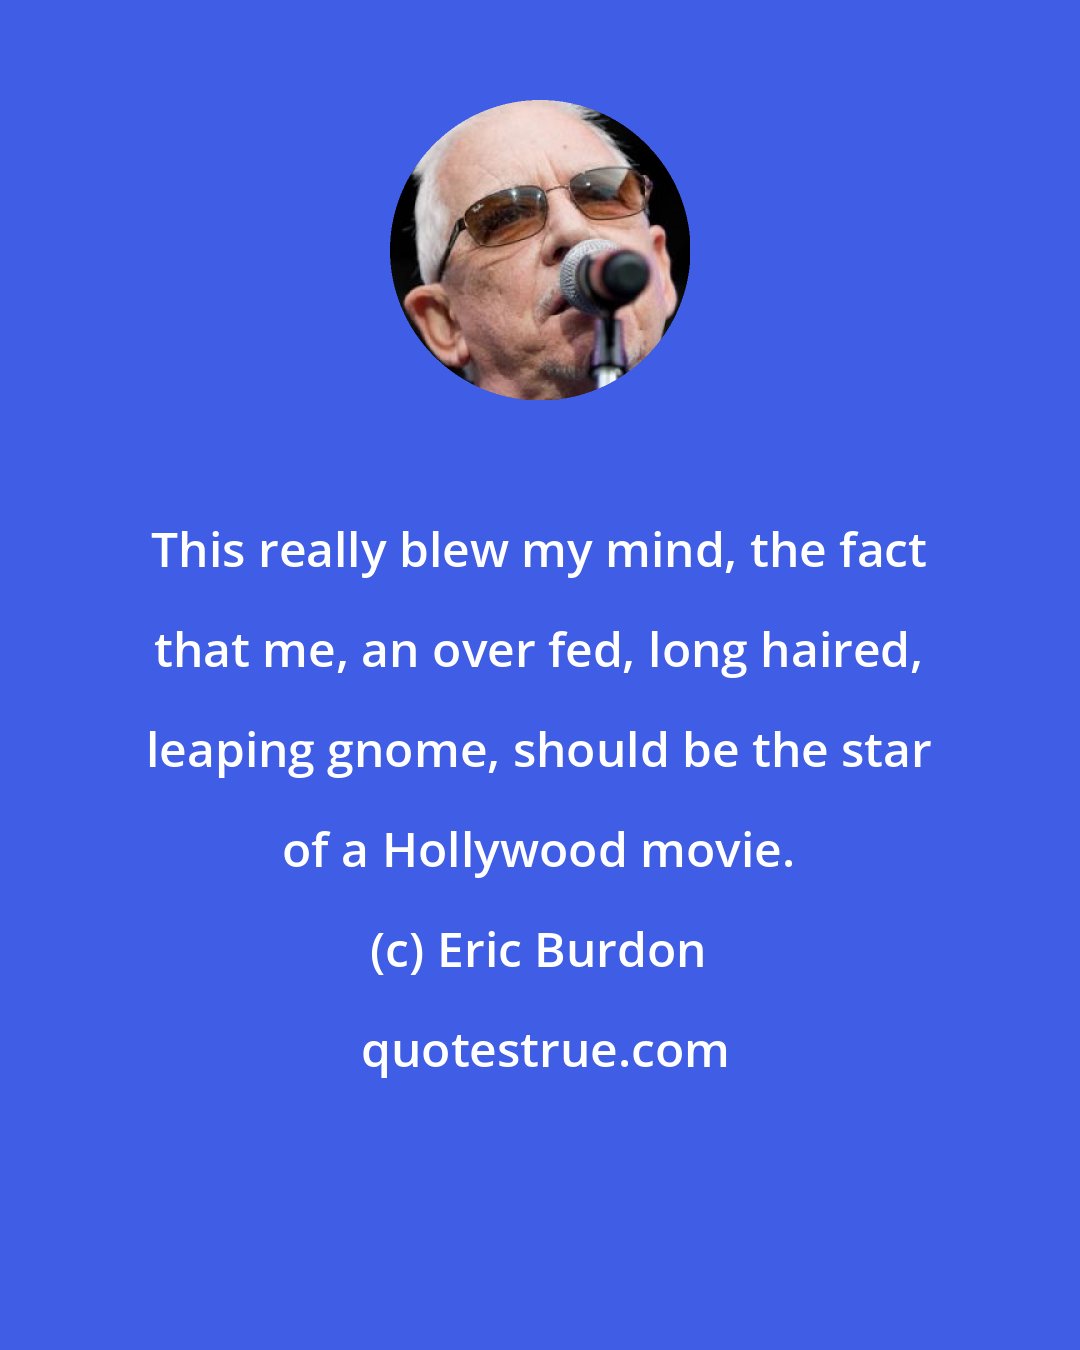 Eric Burdon: This really blew my mind, the fact that me, an over fed, long haired, leaping gnome, should be the star of a Hollywood movie.